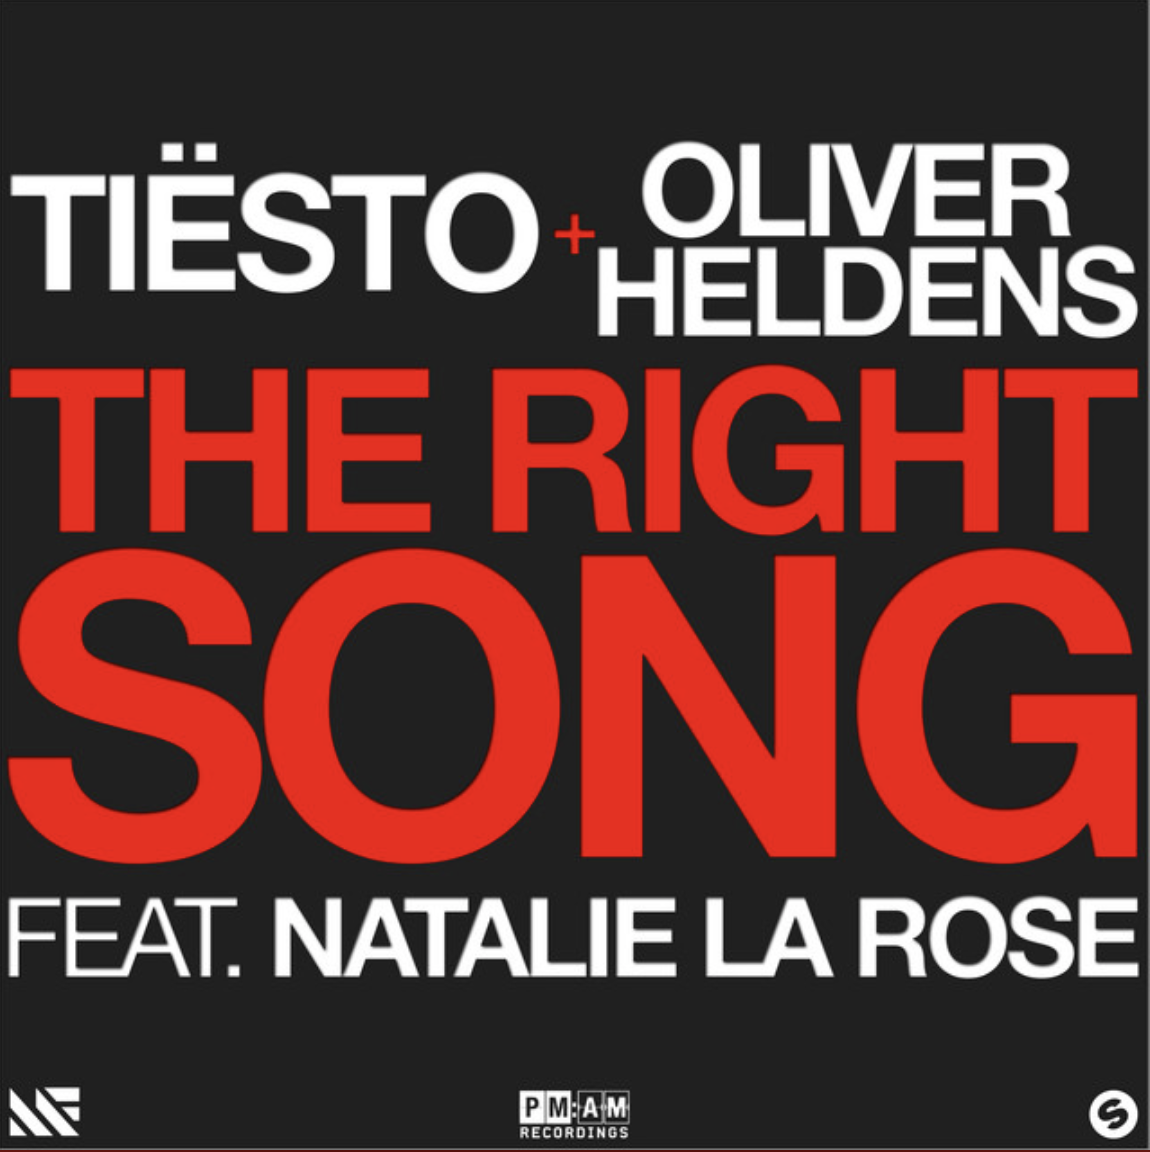 The Right Song - Oliver Heldens, Tiesto (Feat.Natalie La Rose)